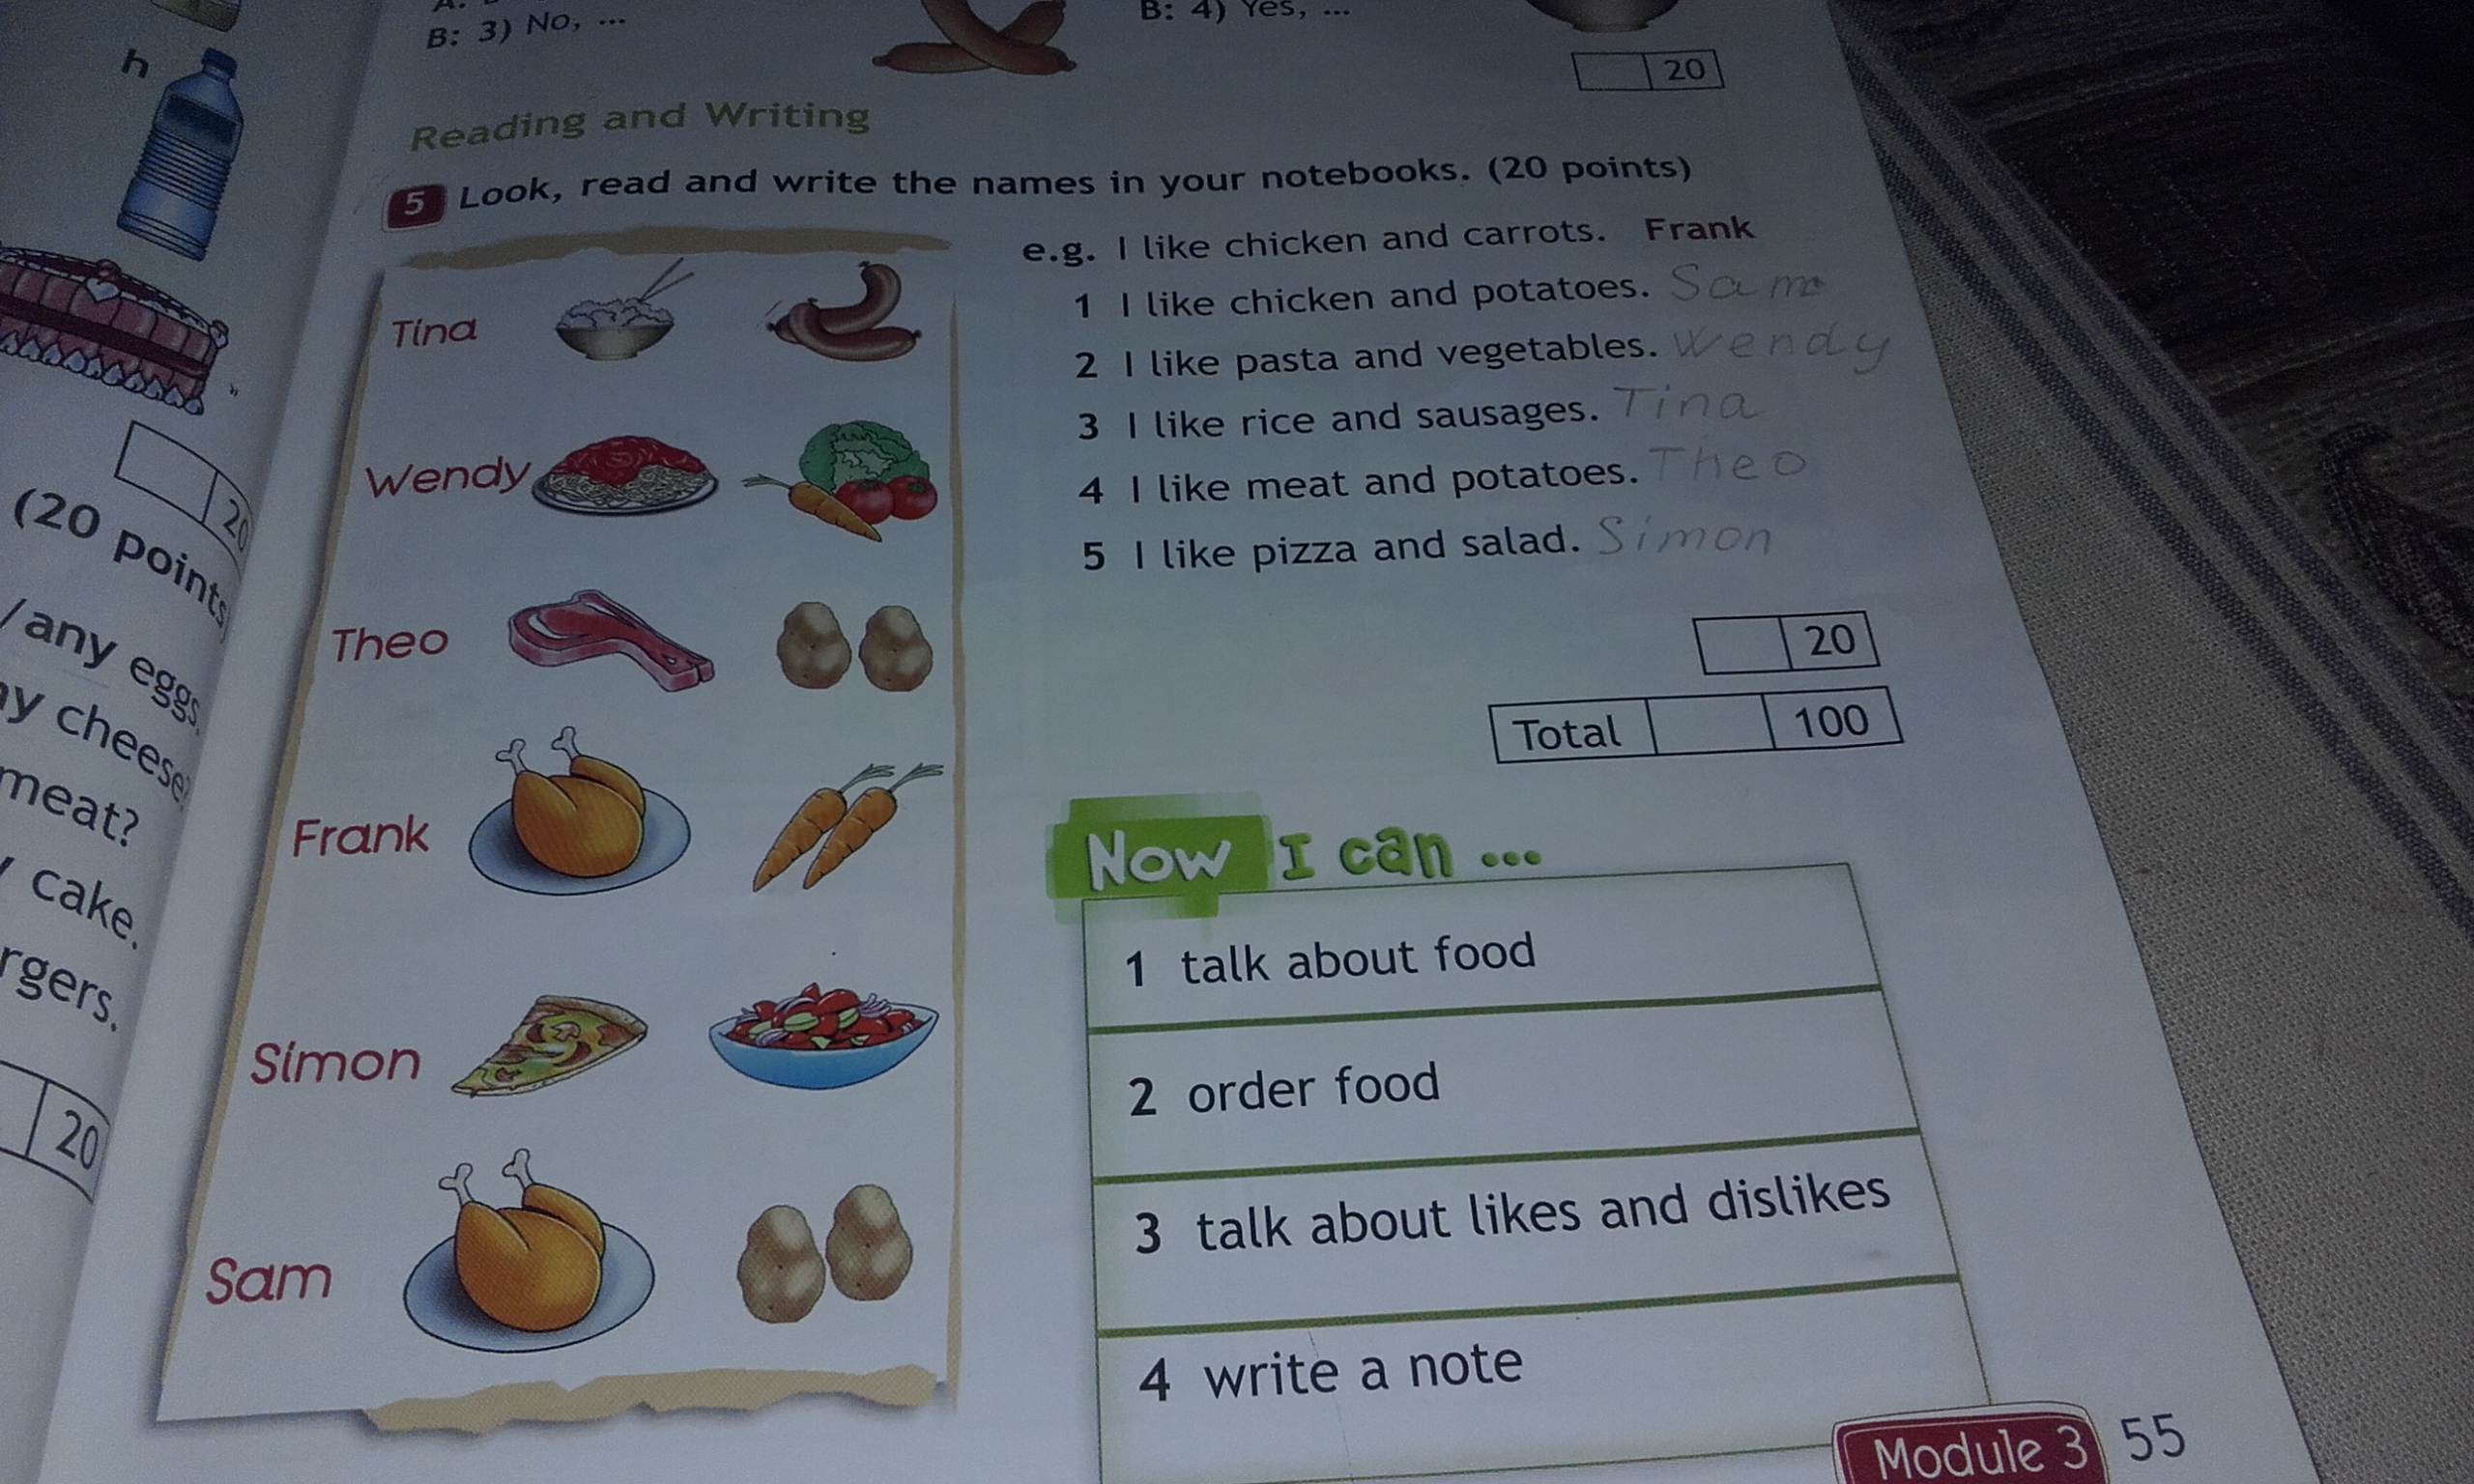 Write 4 marks. Look read and write 4 класс. Английский look ,read and write. Look read and write 2 класс. Английском задание look and write.